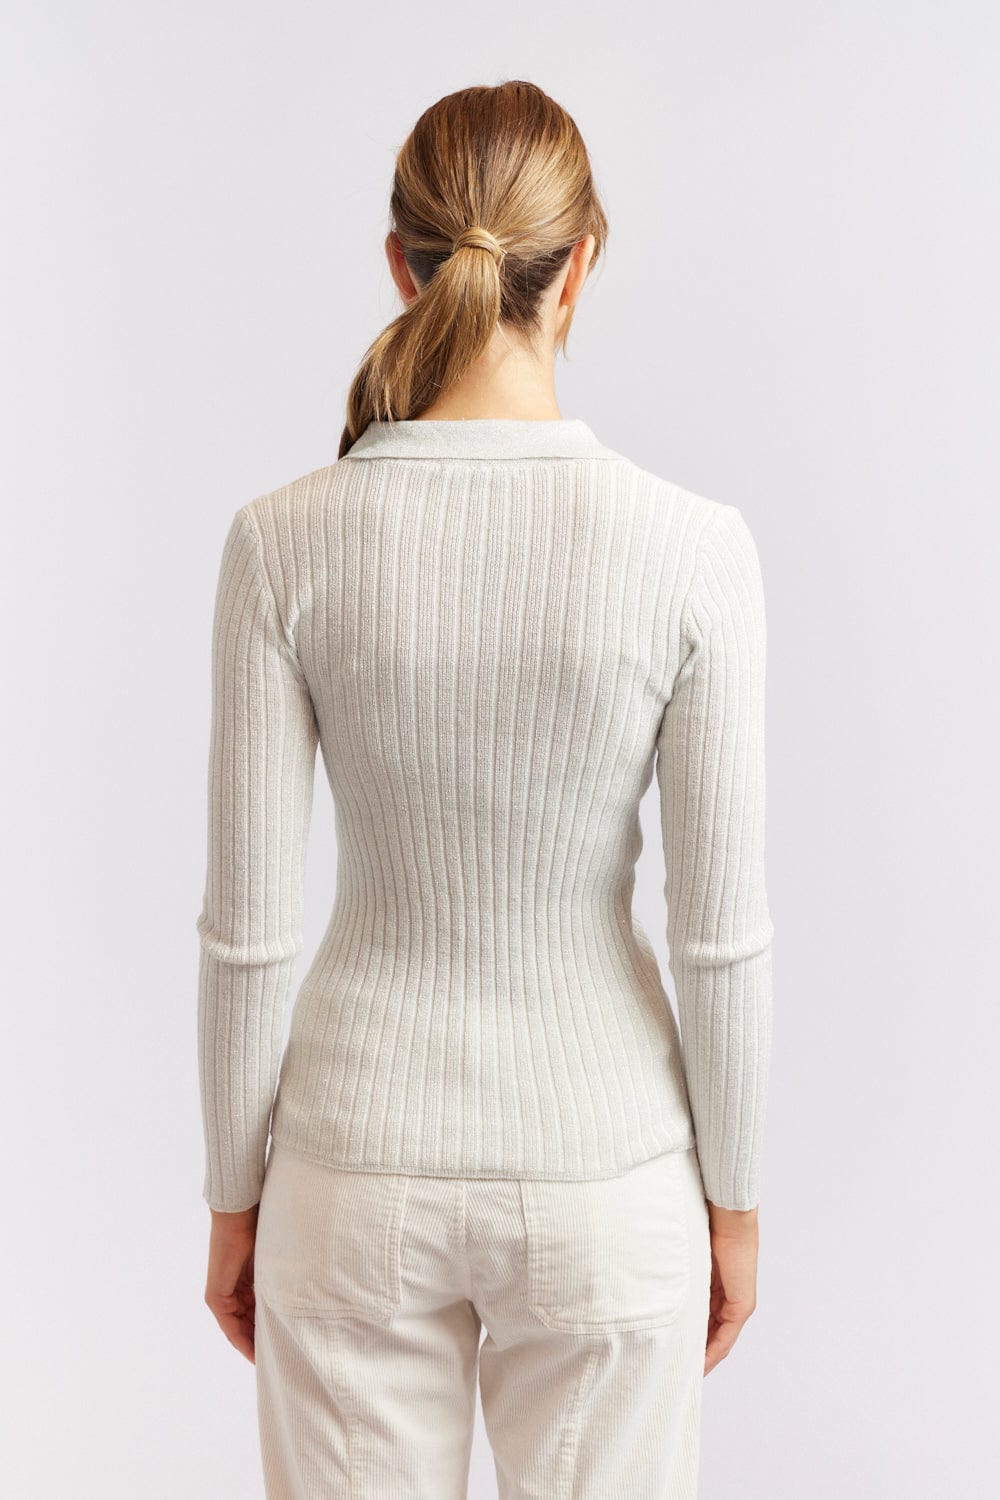 Alessandra Luna Knit Ribbed Top in Ivory White Lurex